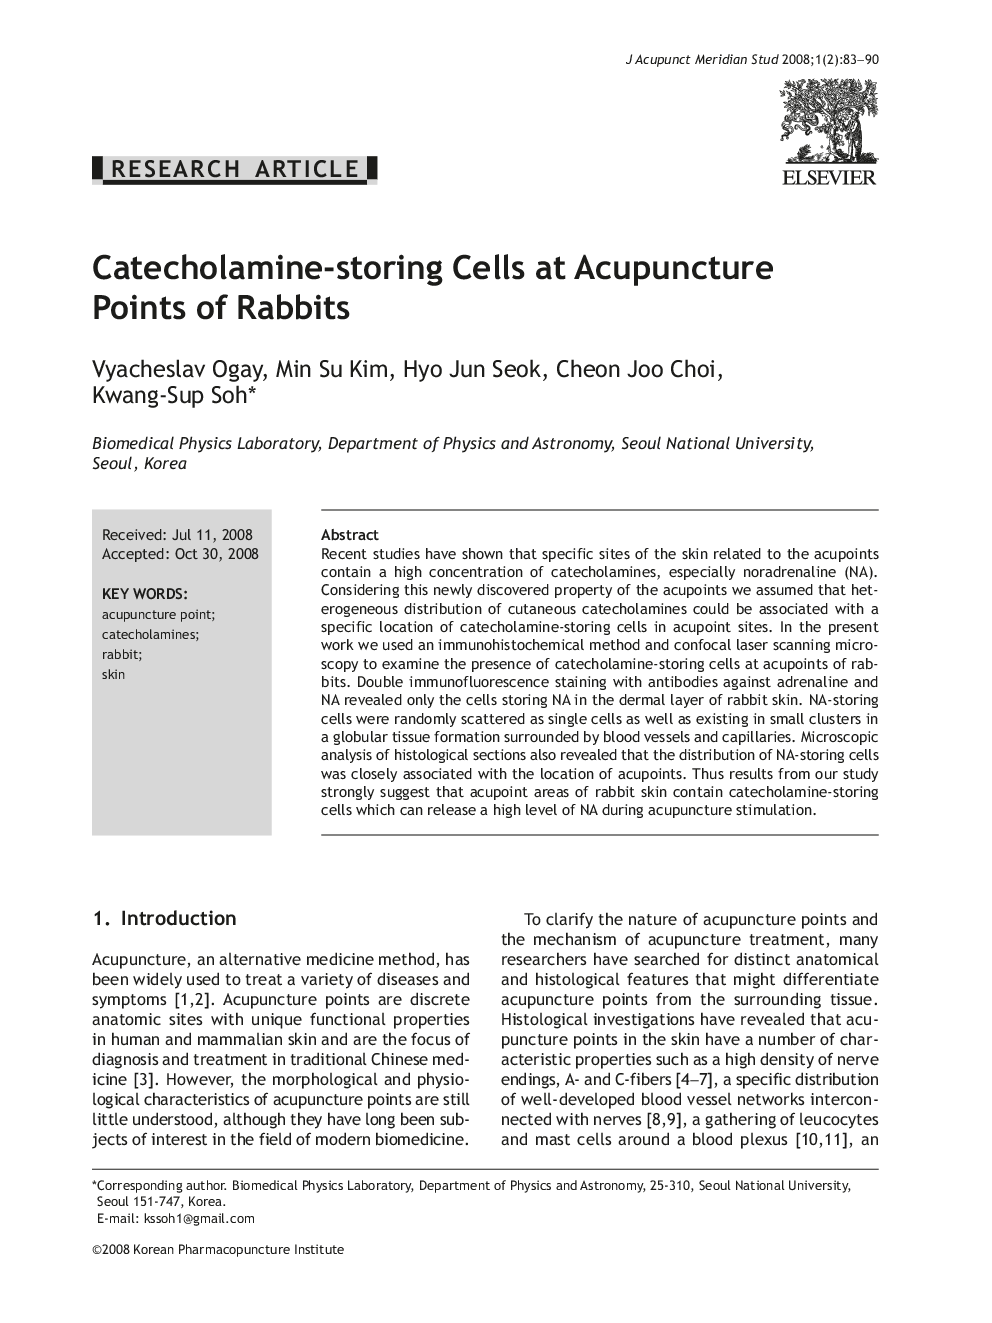 Catecholamine-storing Cells at Acupuncture Points of Rabbits